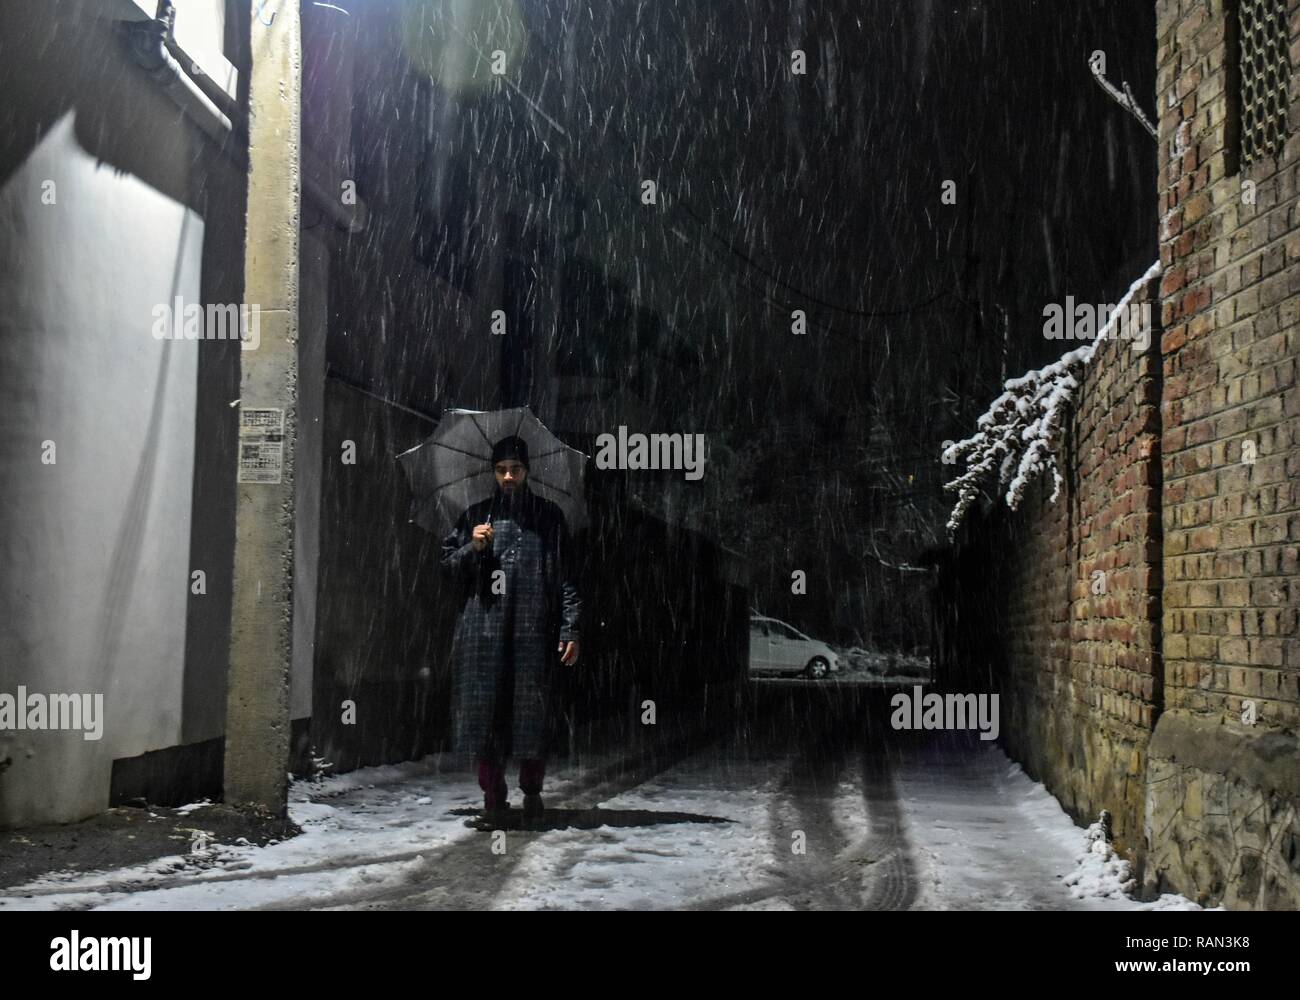 A resident seen walking through a snow covered street during snowfall. Kashmir received its first snowfall of the new year, breaking a month-long dry spell in the Valley. Srinagar recorded a 0 degrees Celsius -- an increase of over four degrees from minus 4.2 degrees Celsius on the previous, the Met department said. The weather department has predicted more snowfall in Kashmir over the next three days. Stock Photo